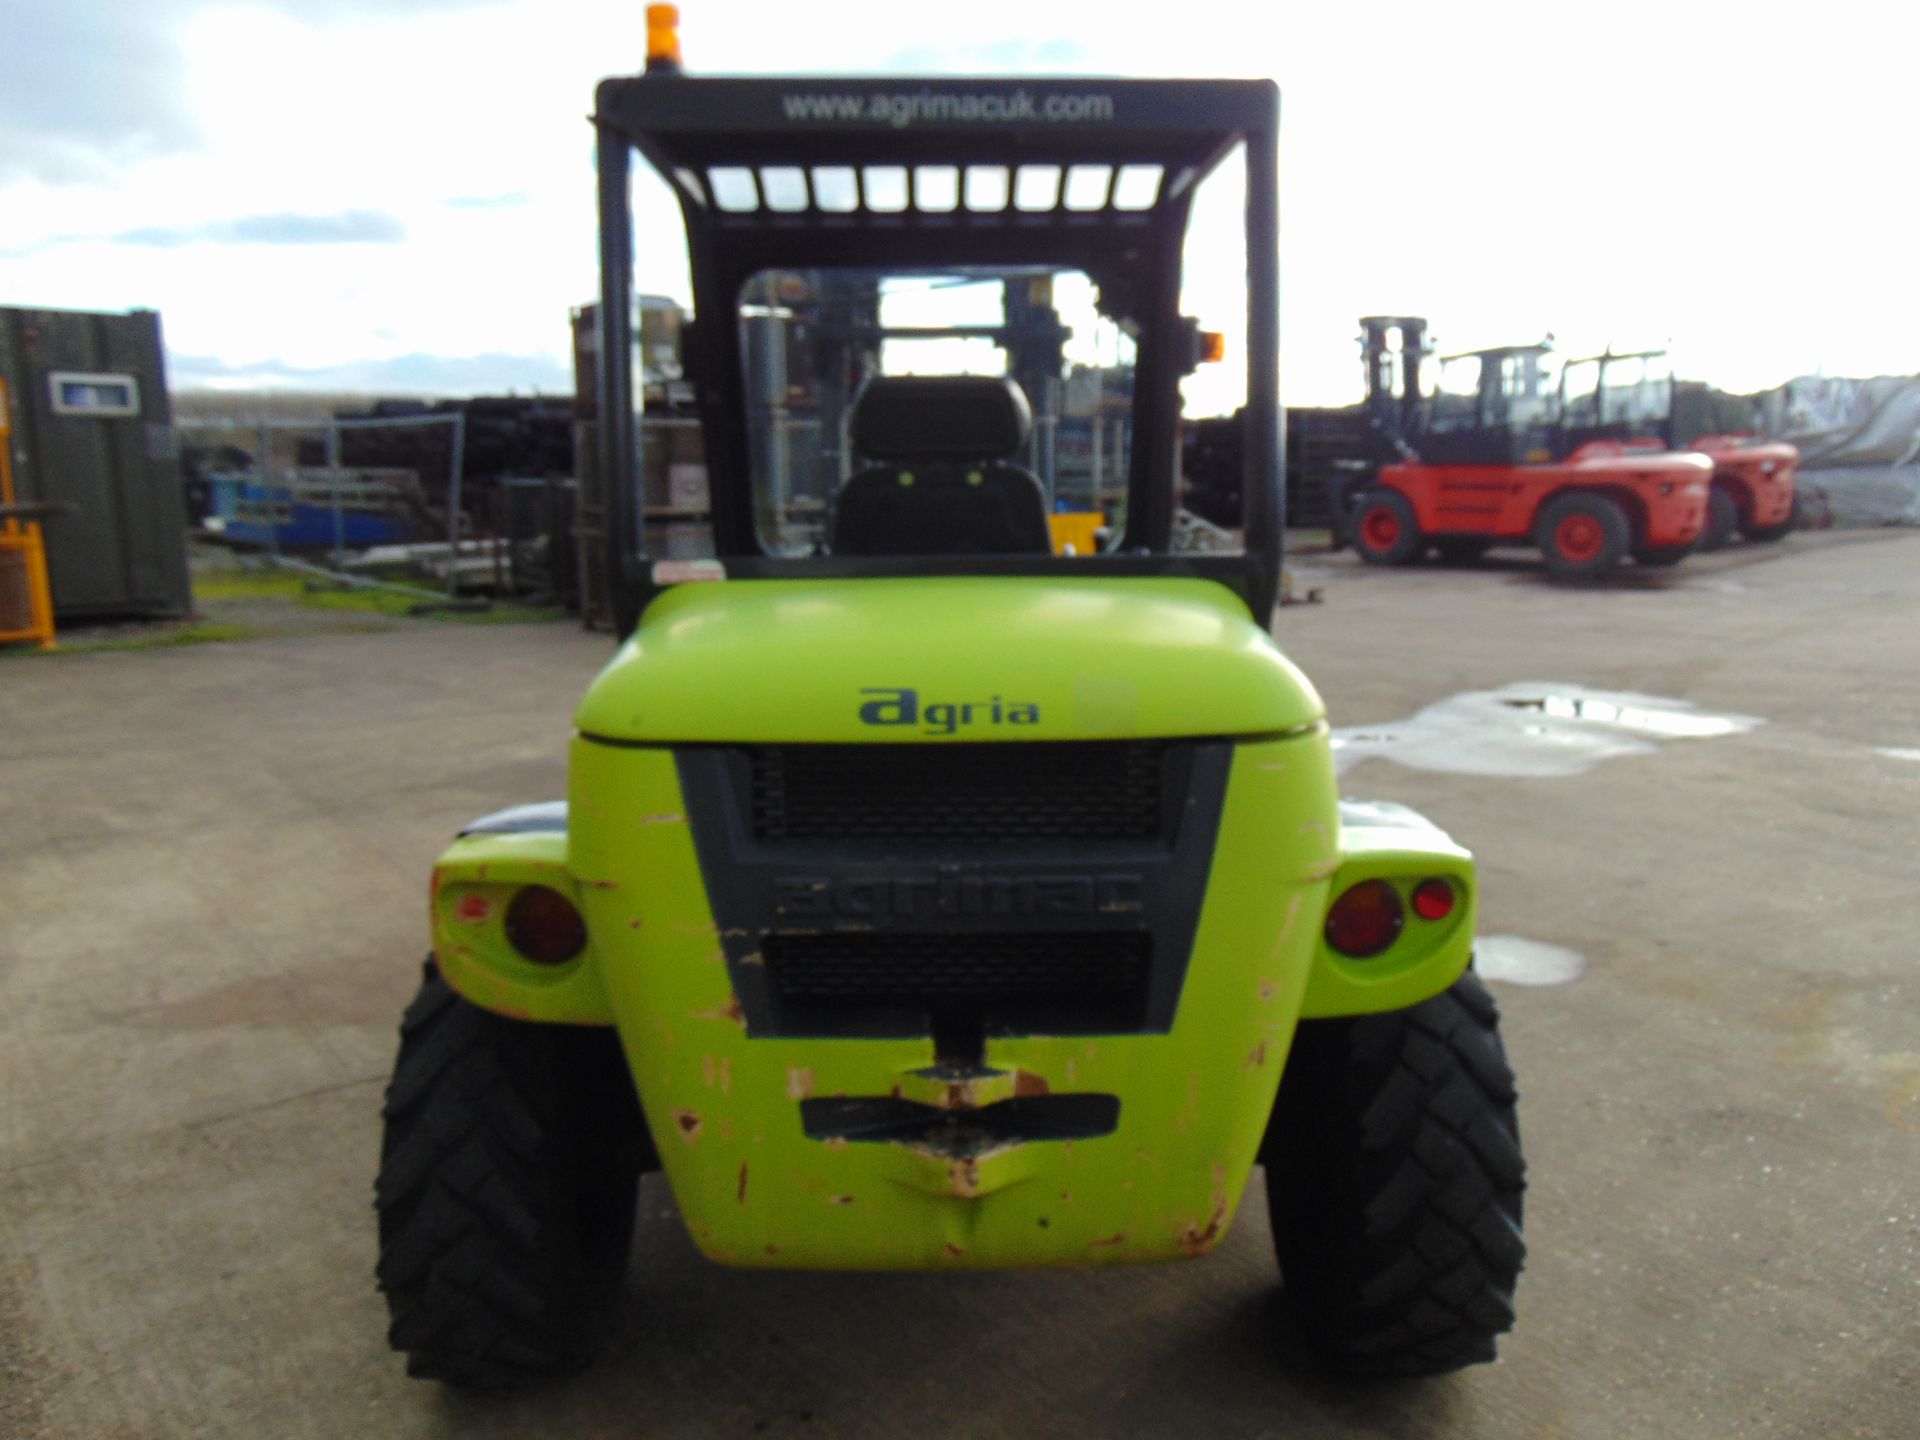 2011 Agrimac Agria TH210 Rough Terrain Diesel Forklift ONLY 1,918 HOURS! - Image 7 of 29